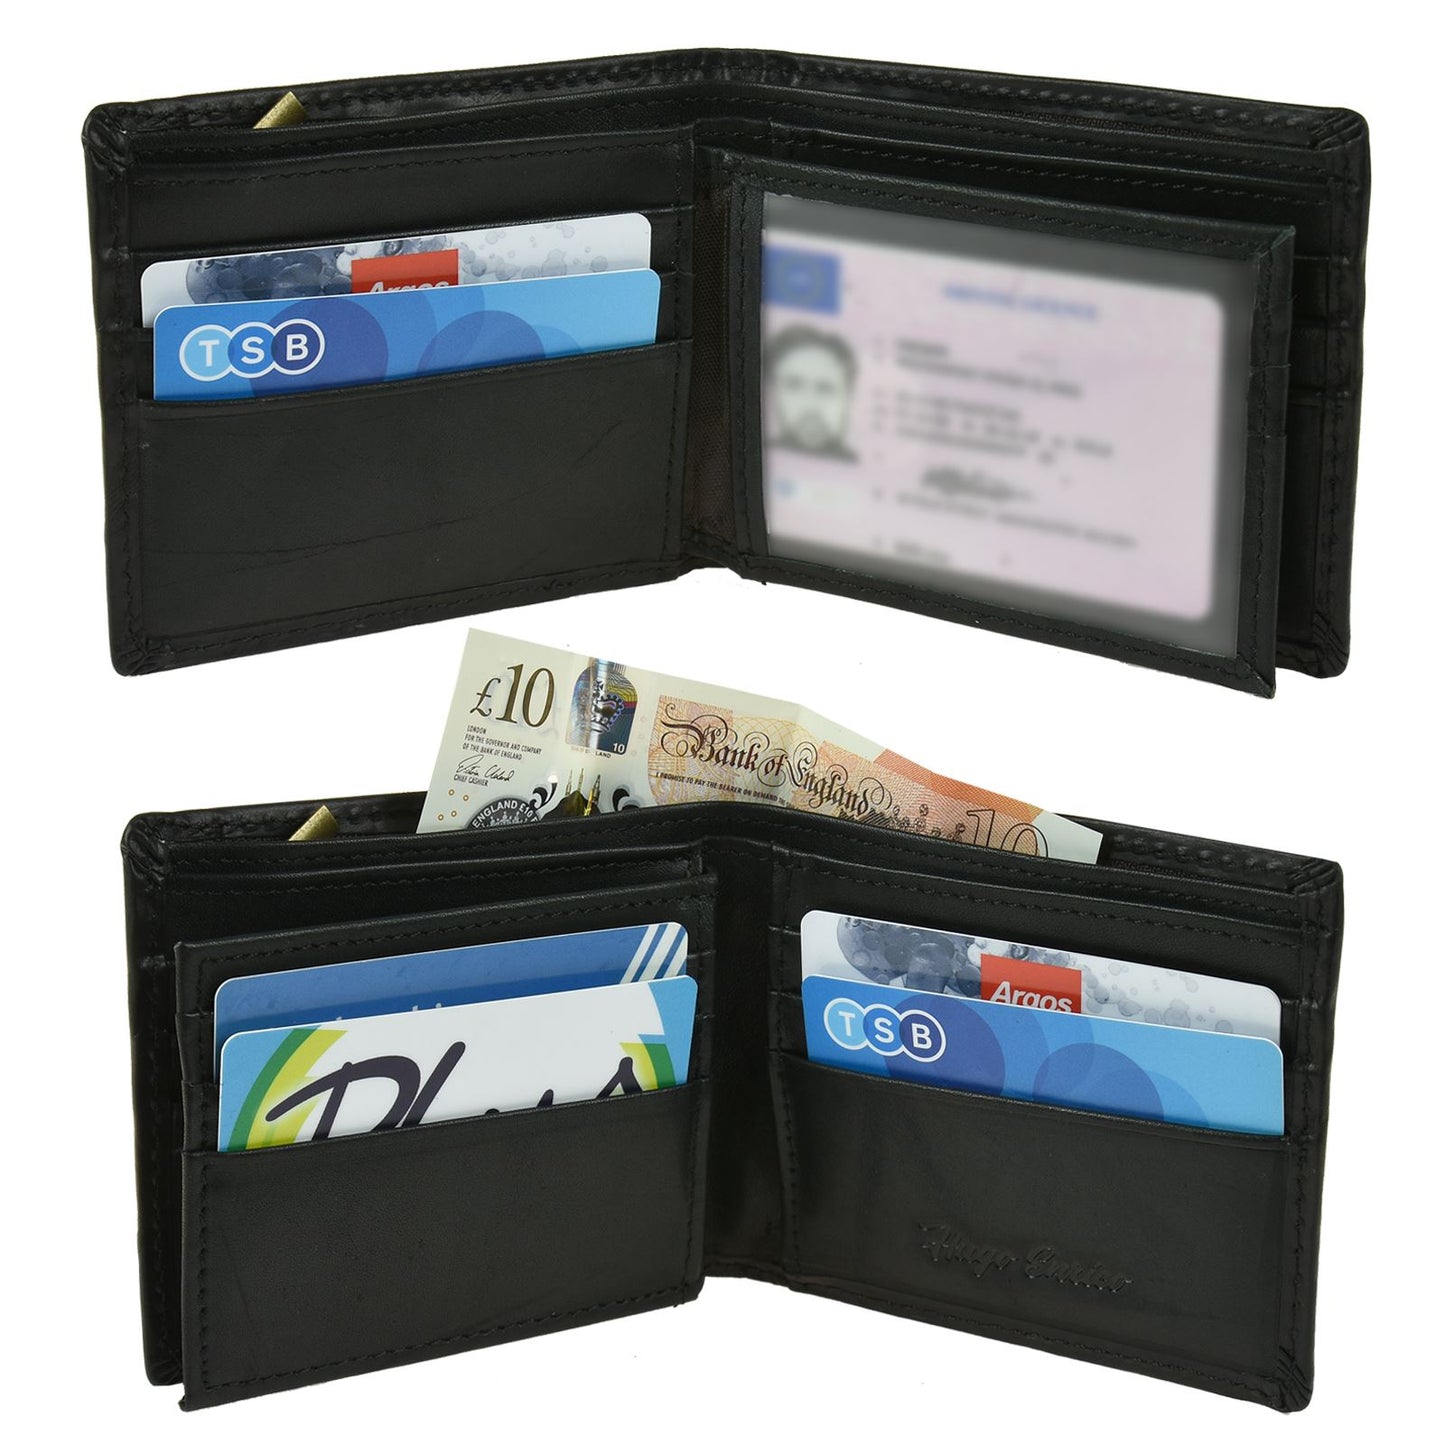 Stay Organized with a Hugo Enrico Wallet